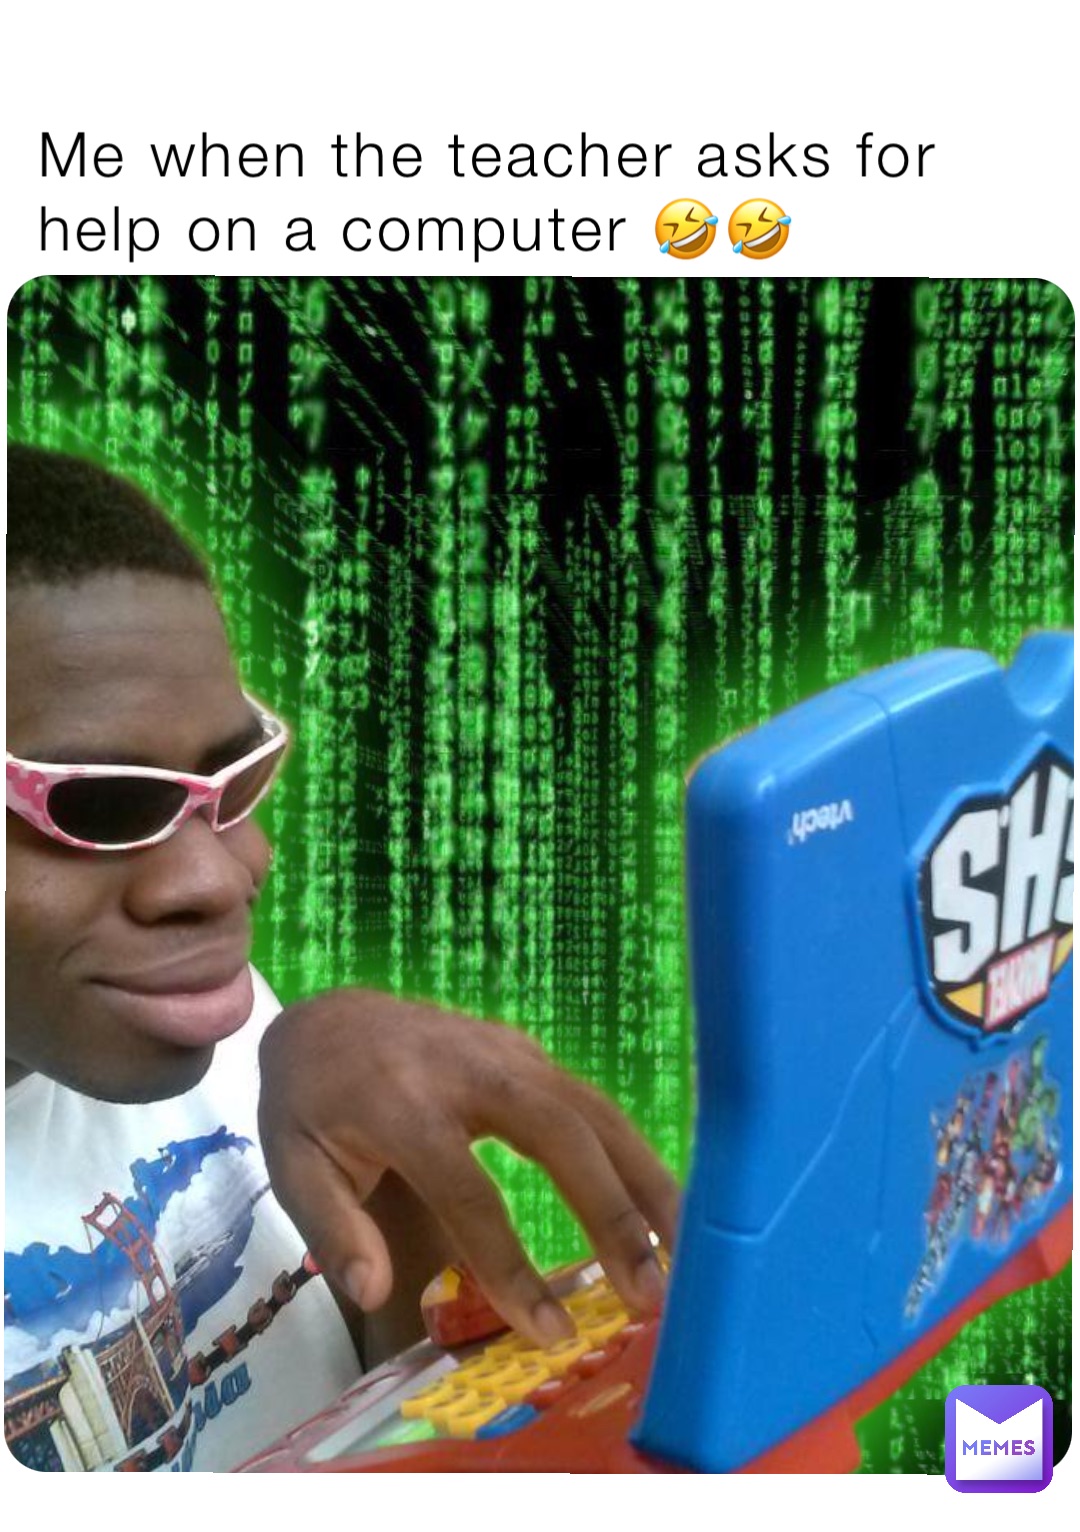 Me when the teacher asks for help on a computer 🤣🤣